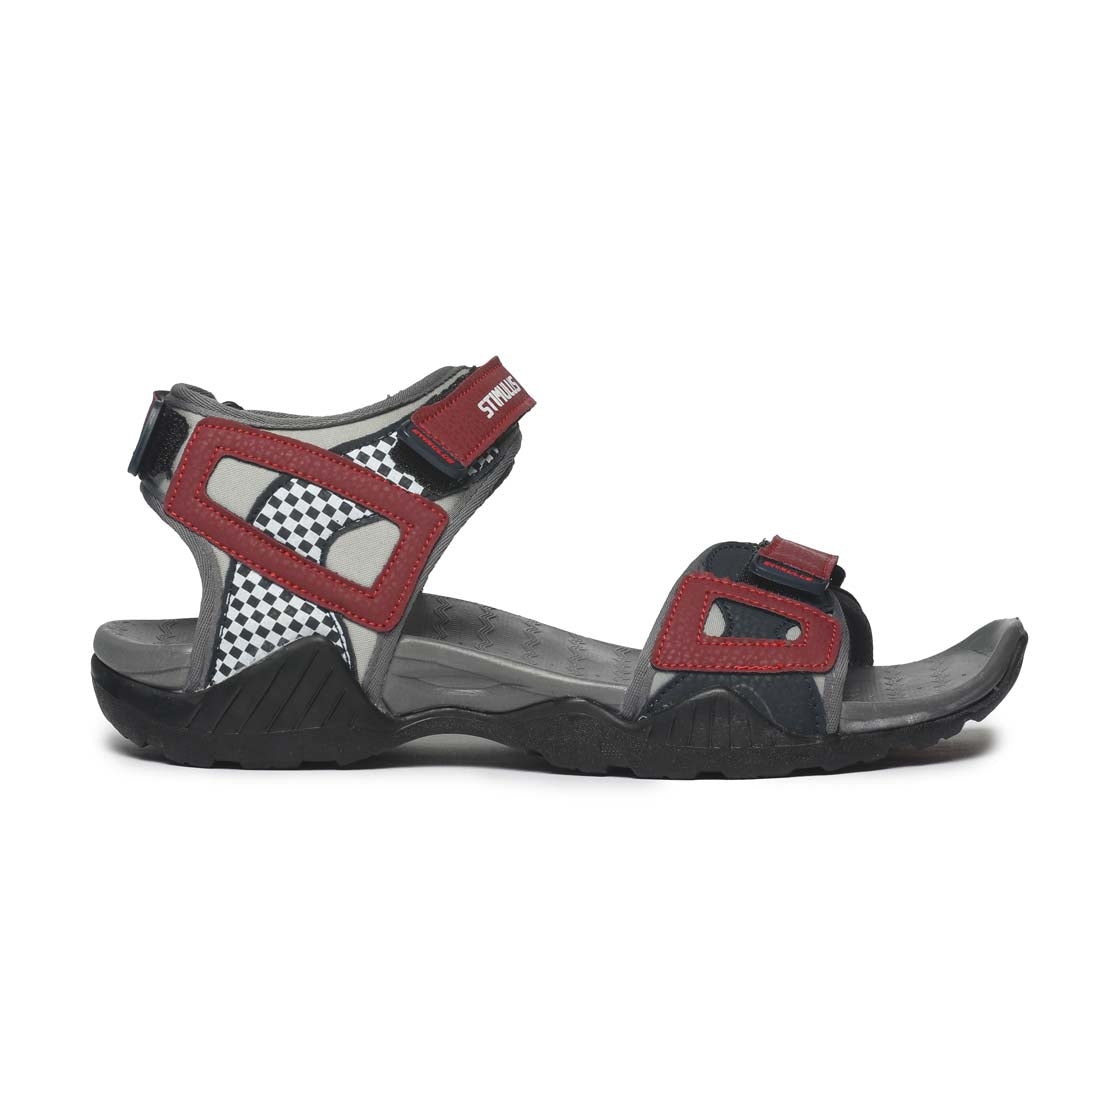 Paragon FB9050G Men Stylish Sandals | Comfortable Sandals for Daily Outdoor Use | Casual Formal Sandals with Cushioned Soles